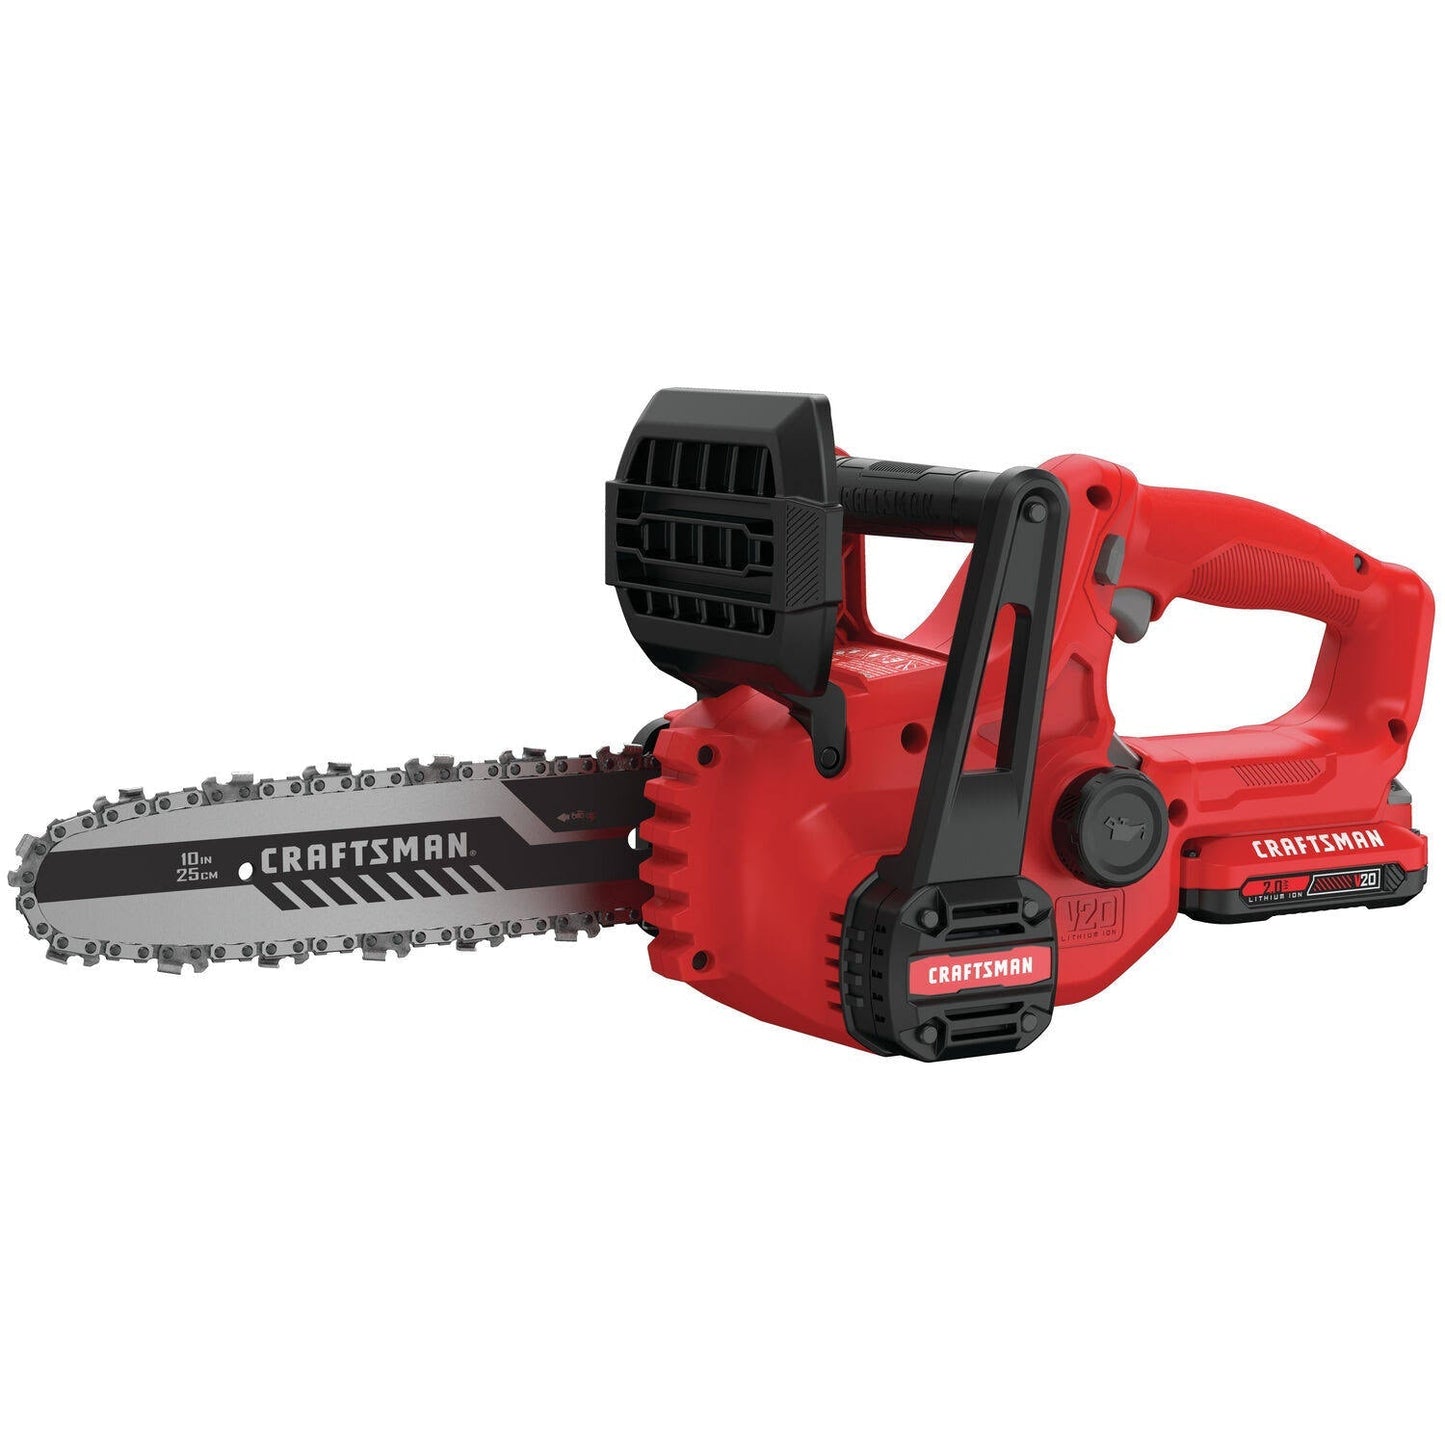 Craftsman 10 in. 20 Volt Battery Chainsaw Kit (Battery & Charger)